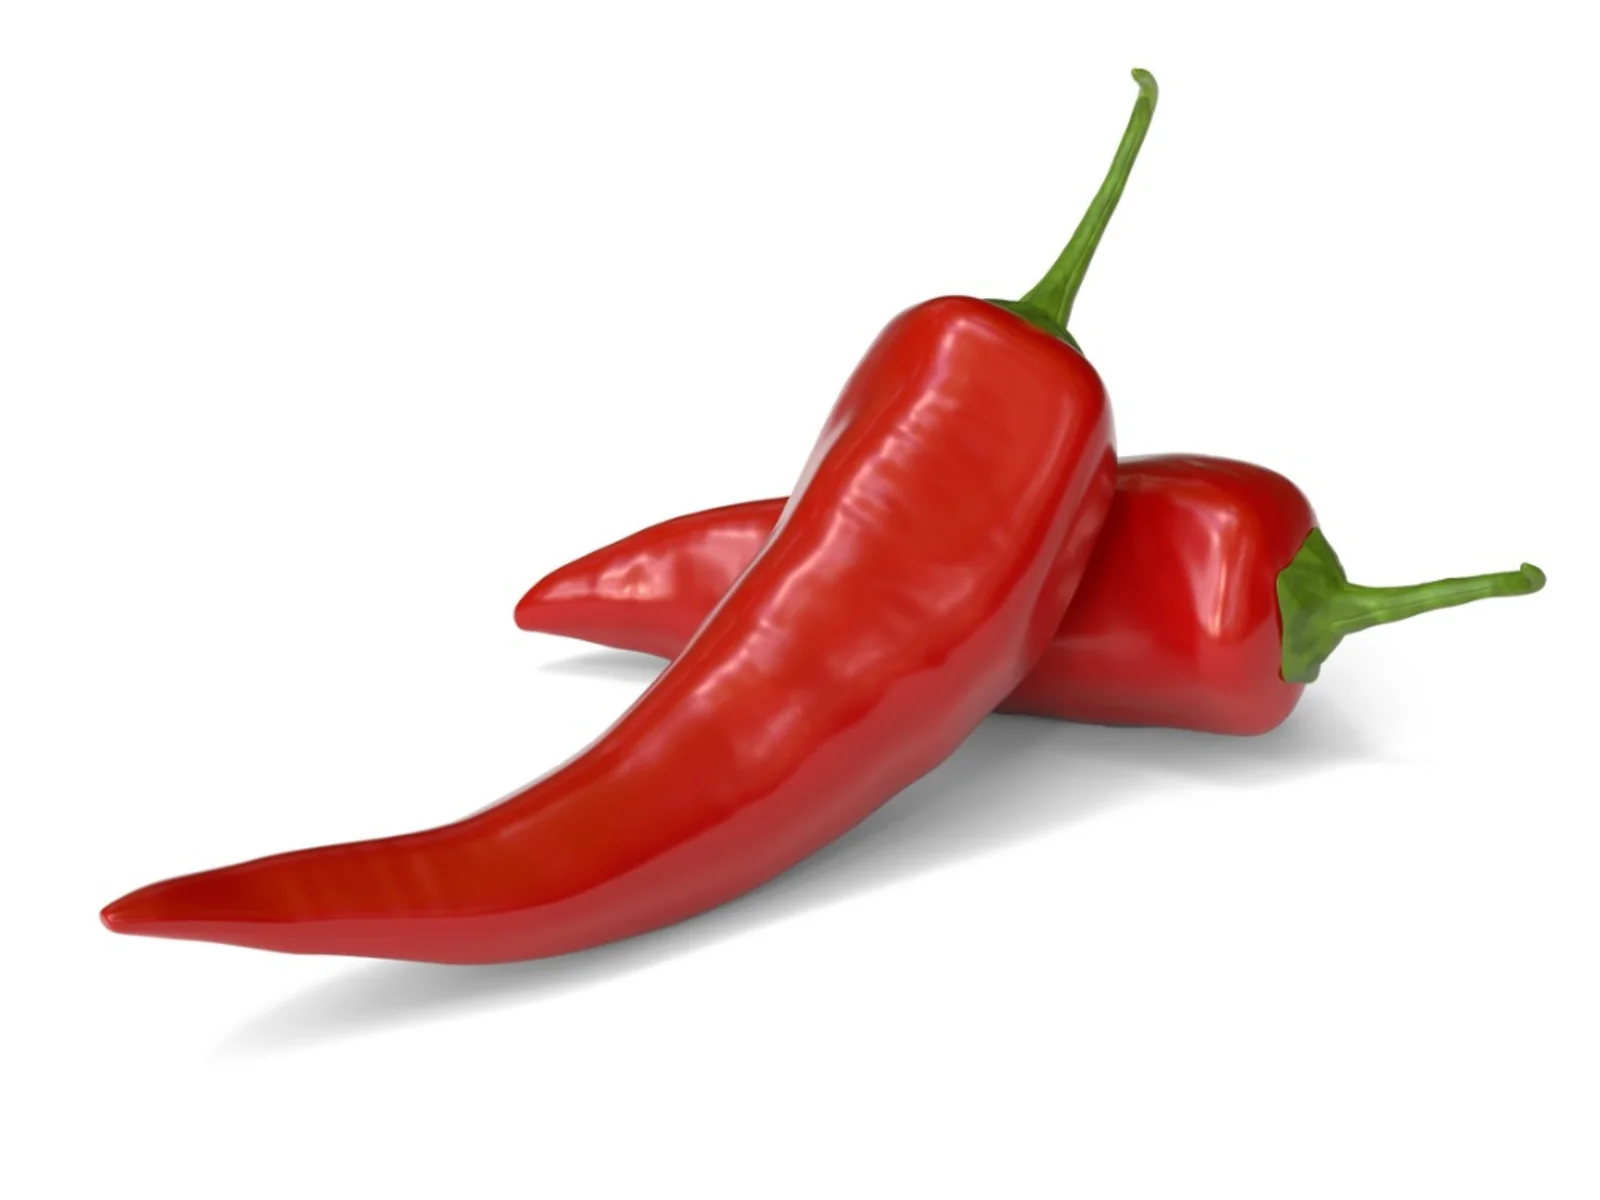 Chili-pepper image - Agro trade for import & export [Mahdy Fresh - since 2000]